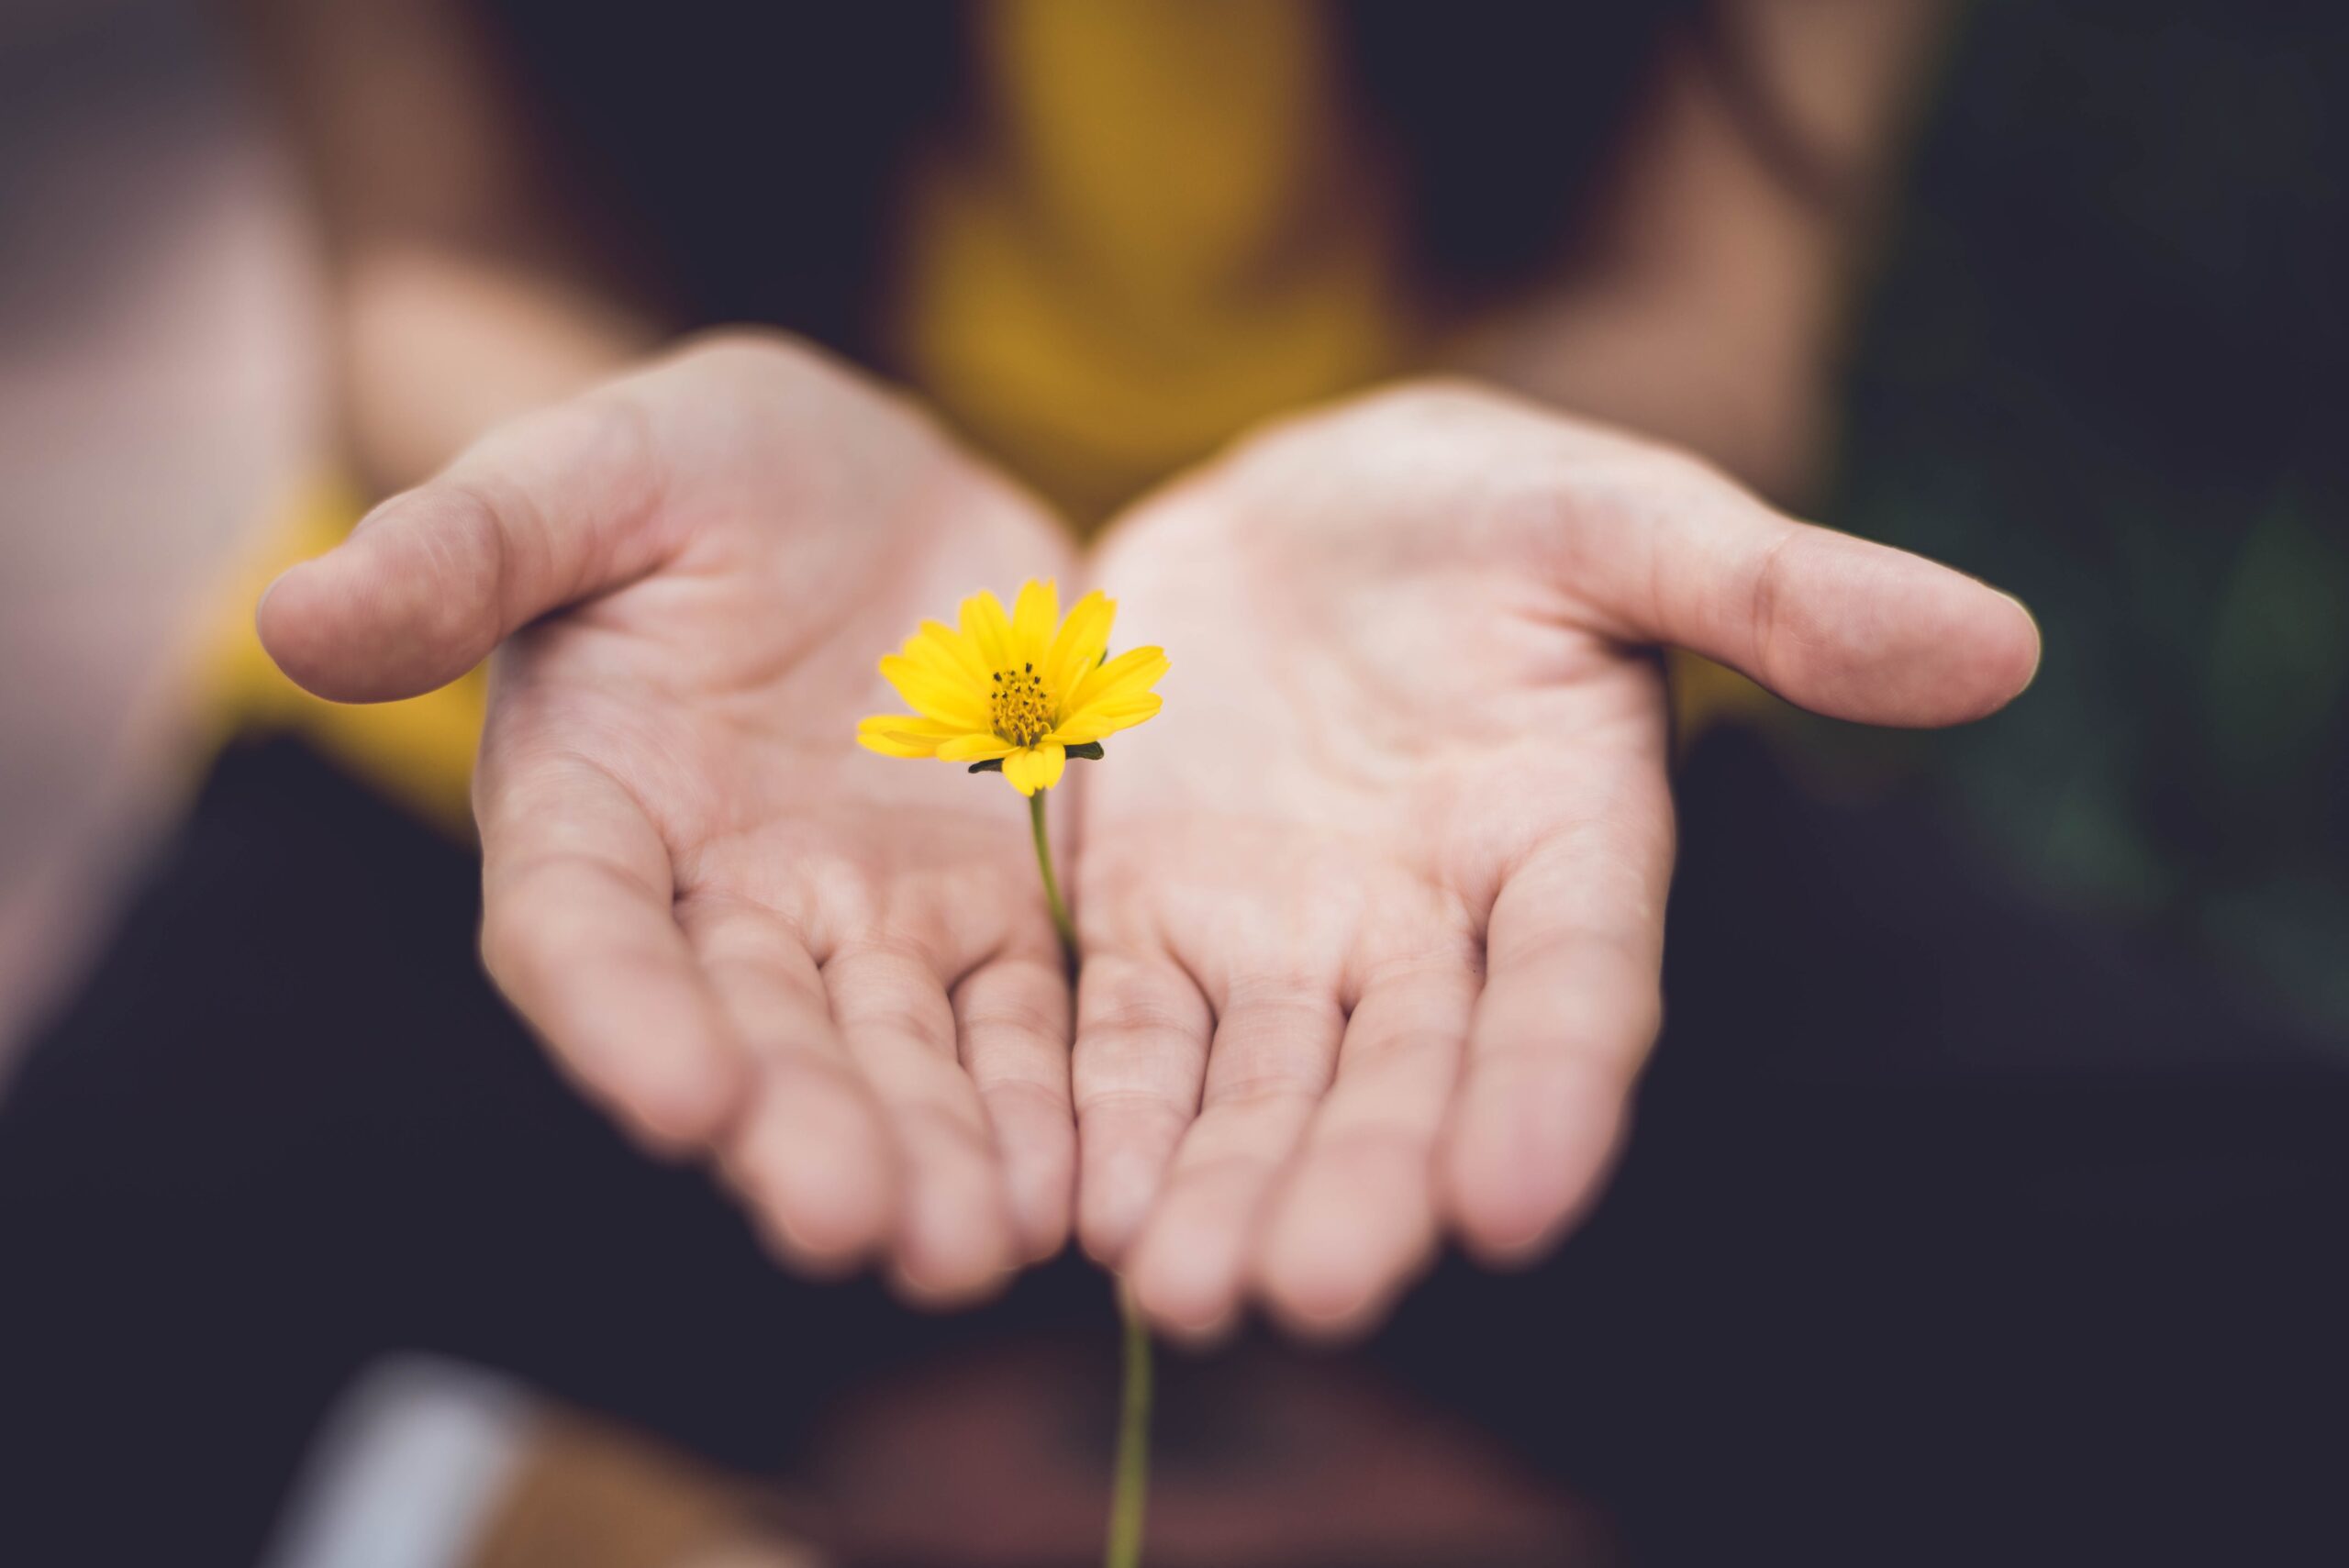 Two hands hold a small yellow flower